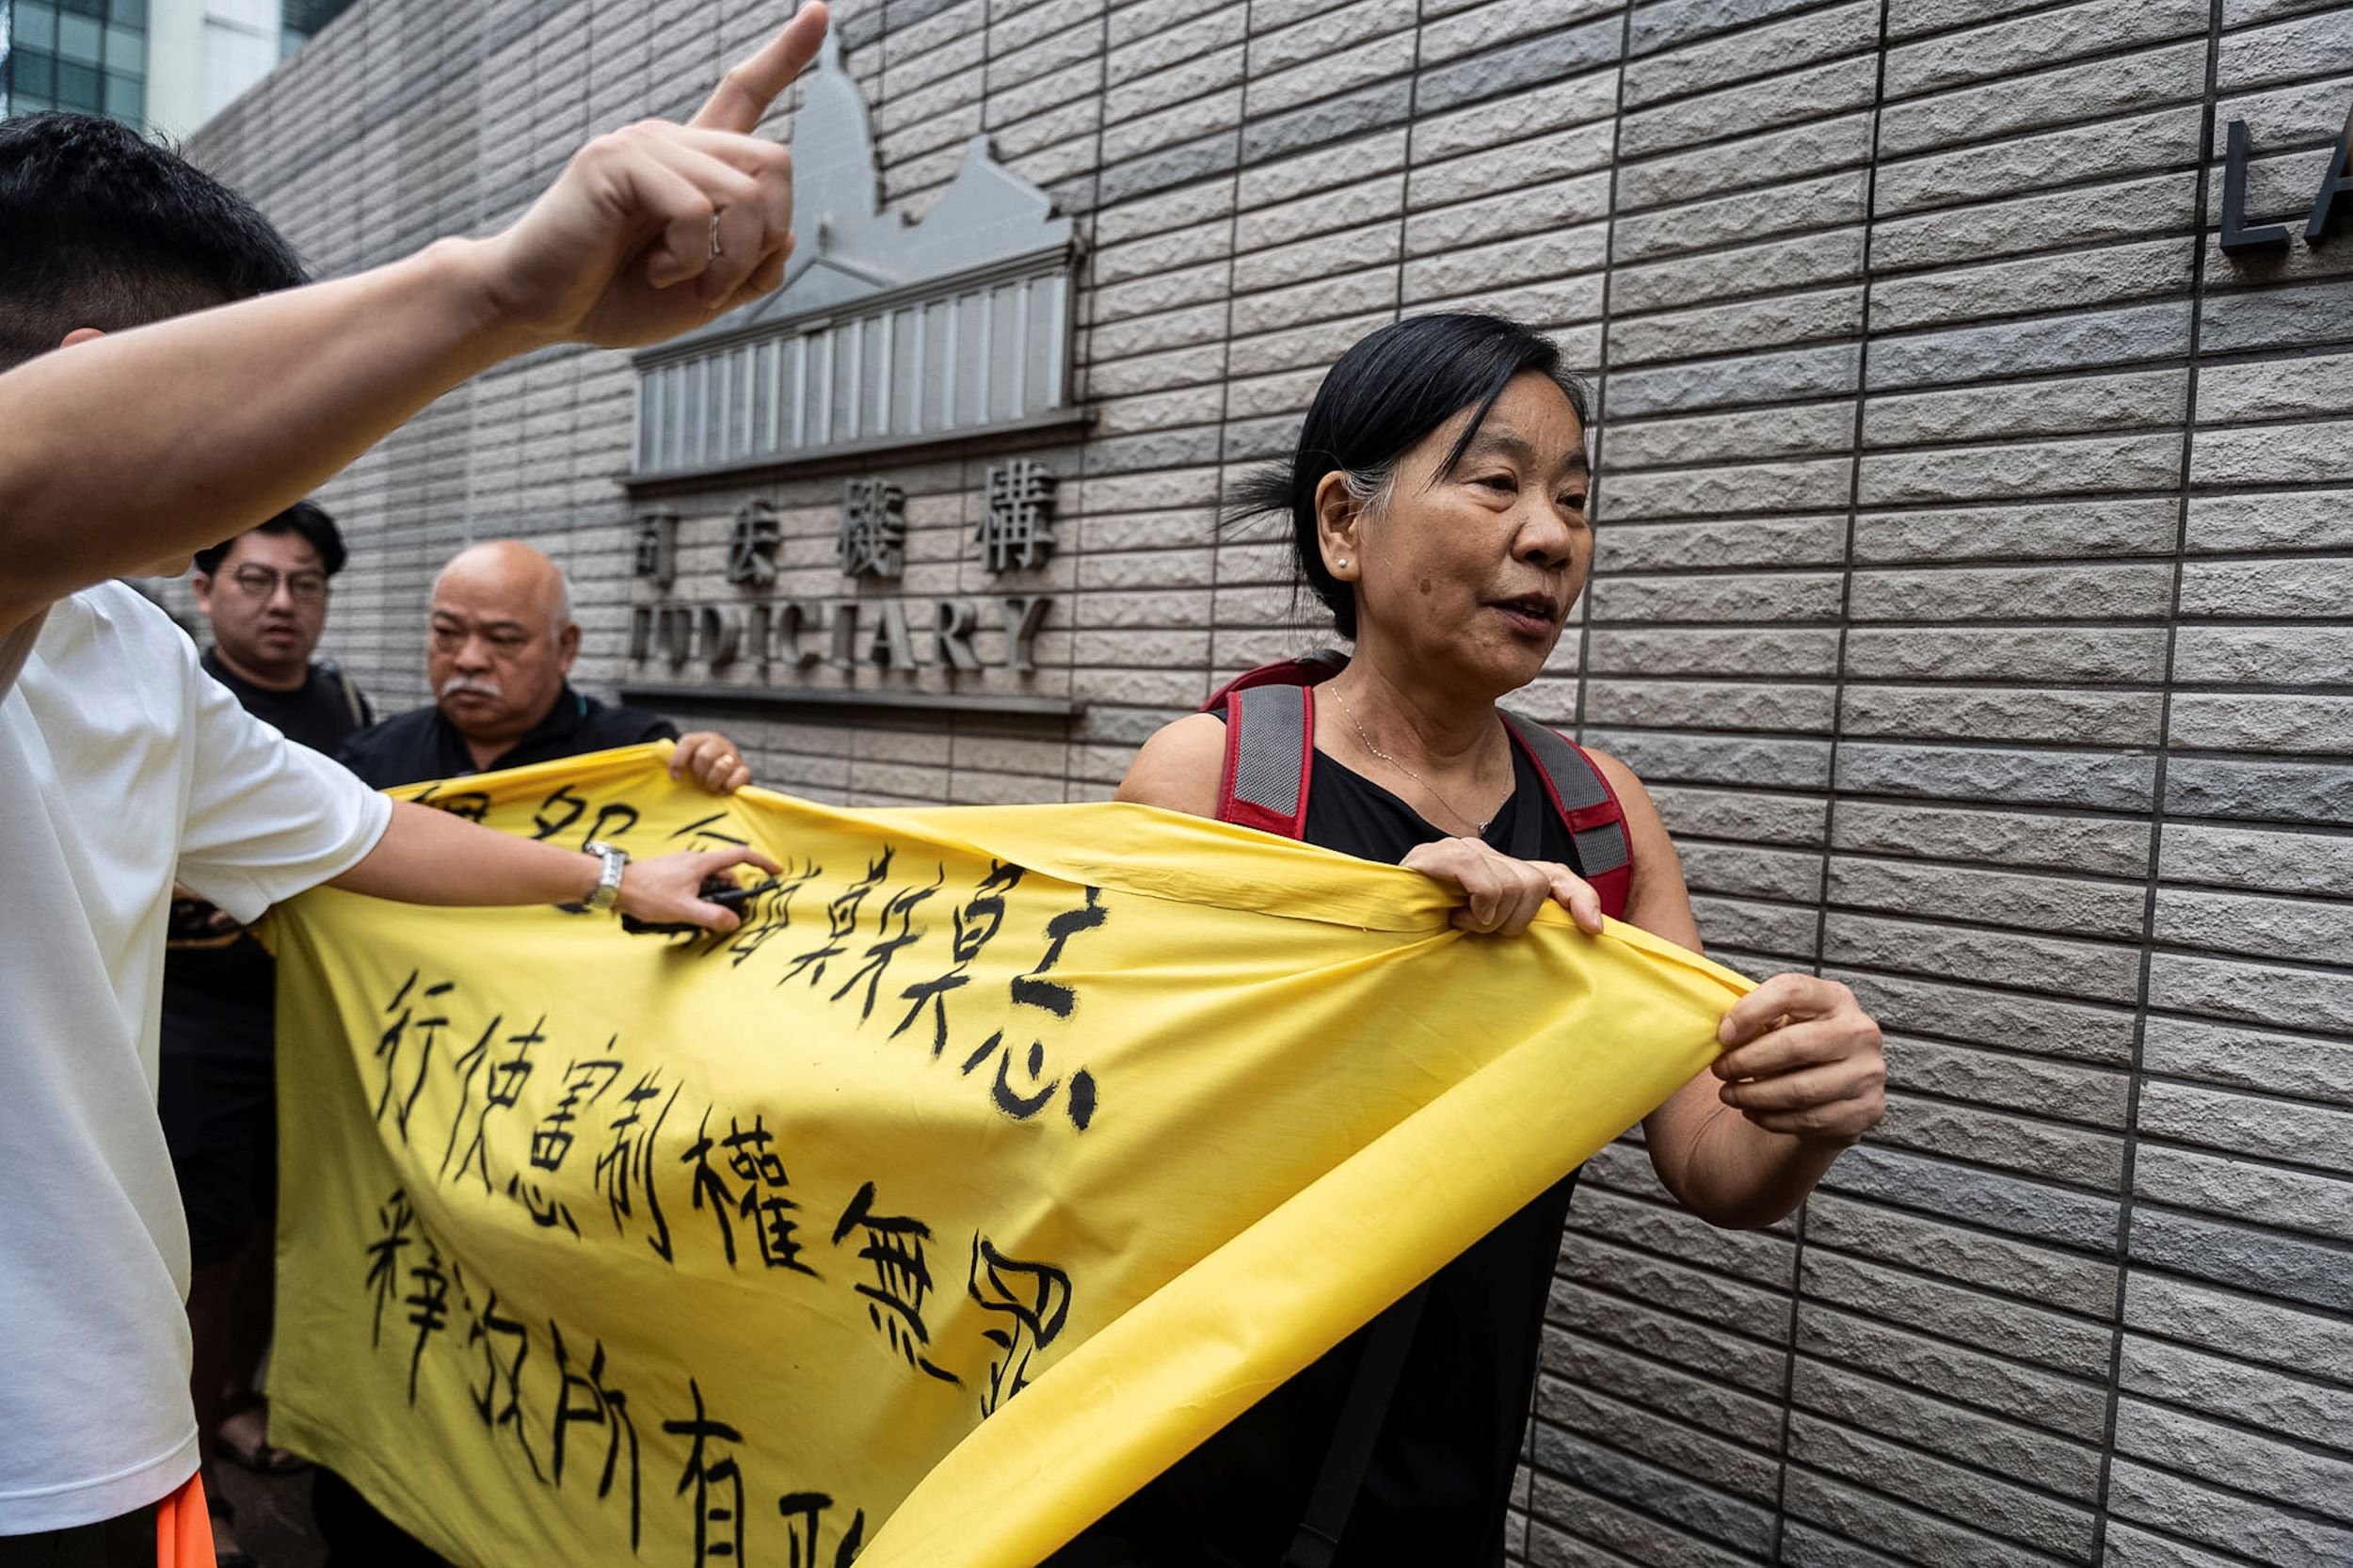 14 Hong Kong democracy campaigners found guilty of subversion